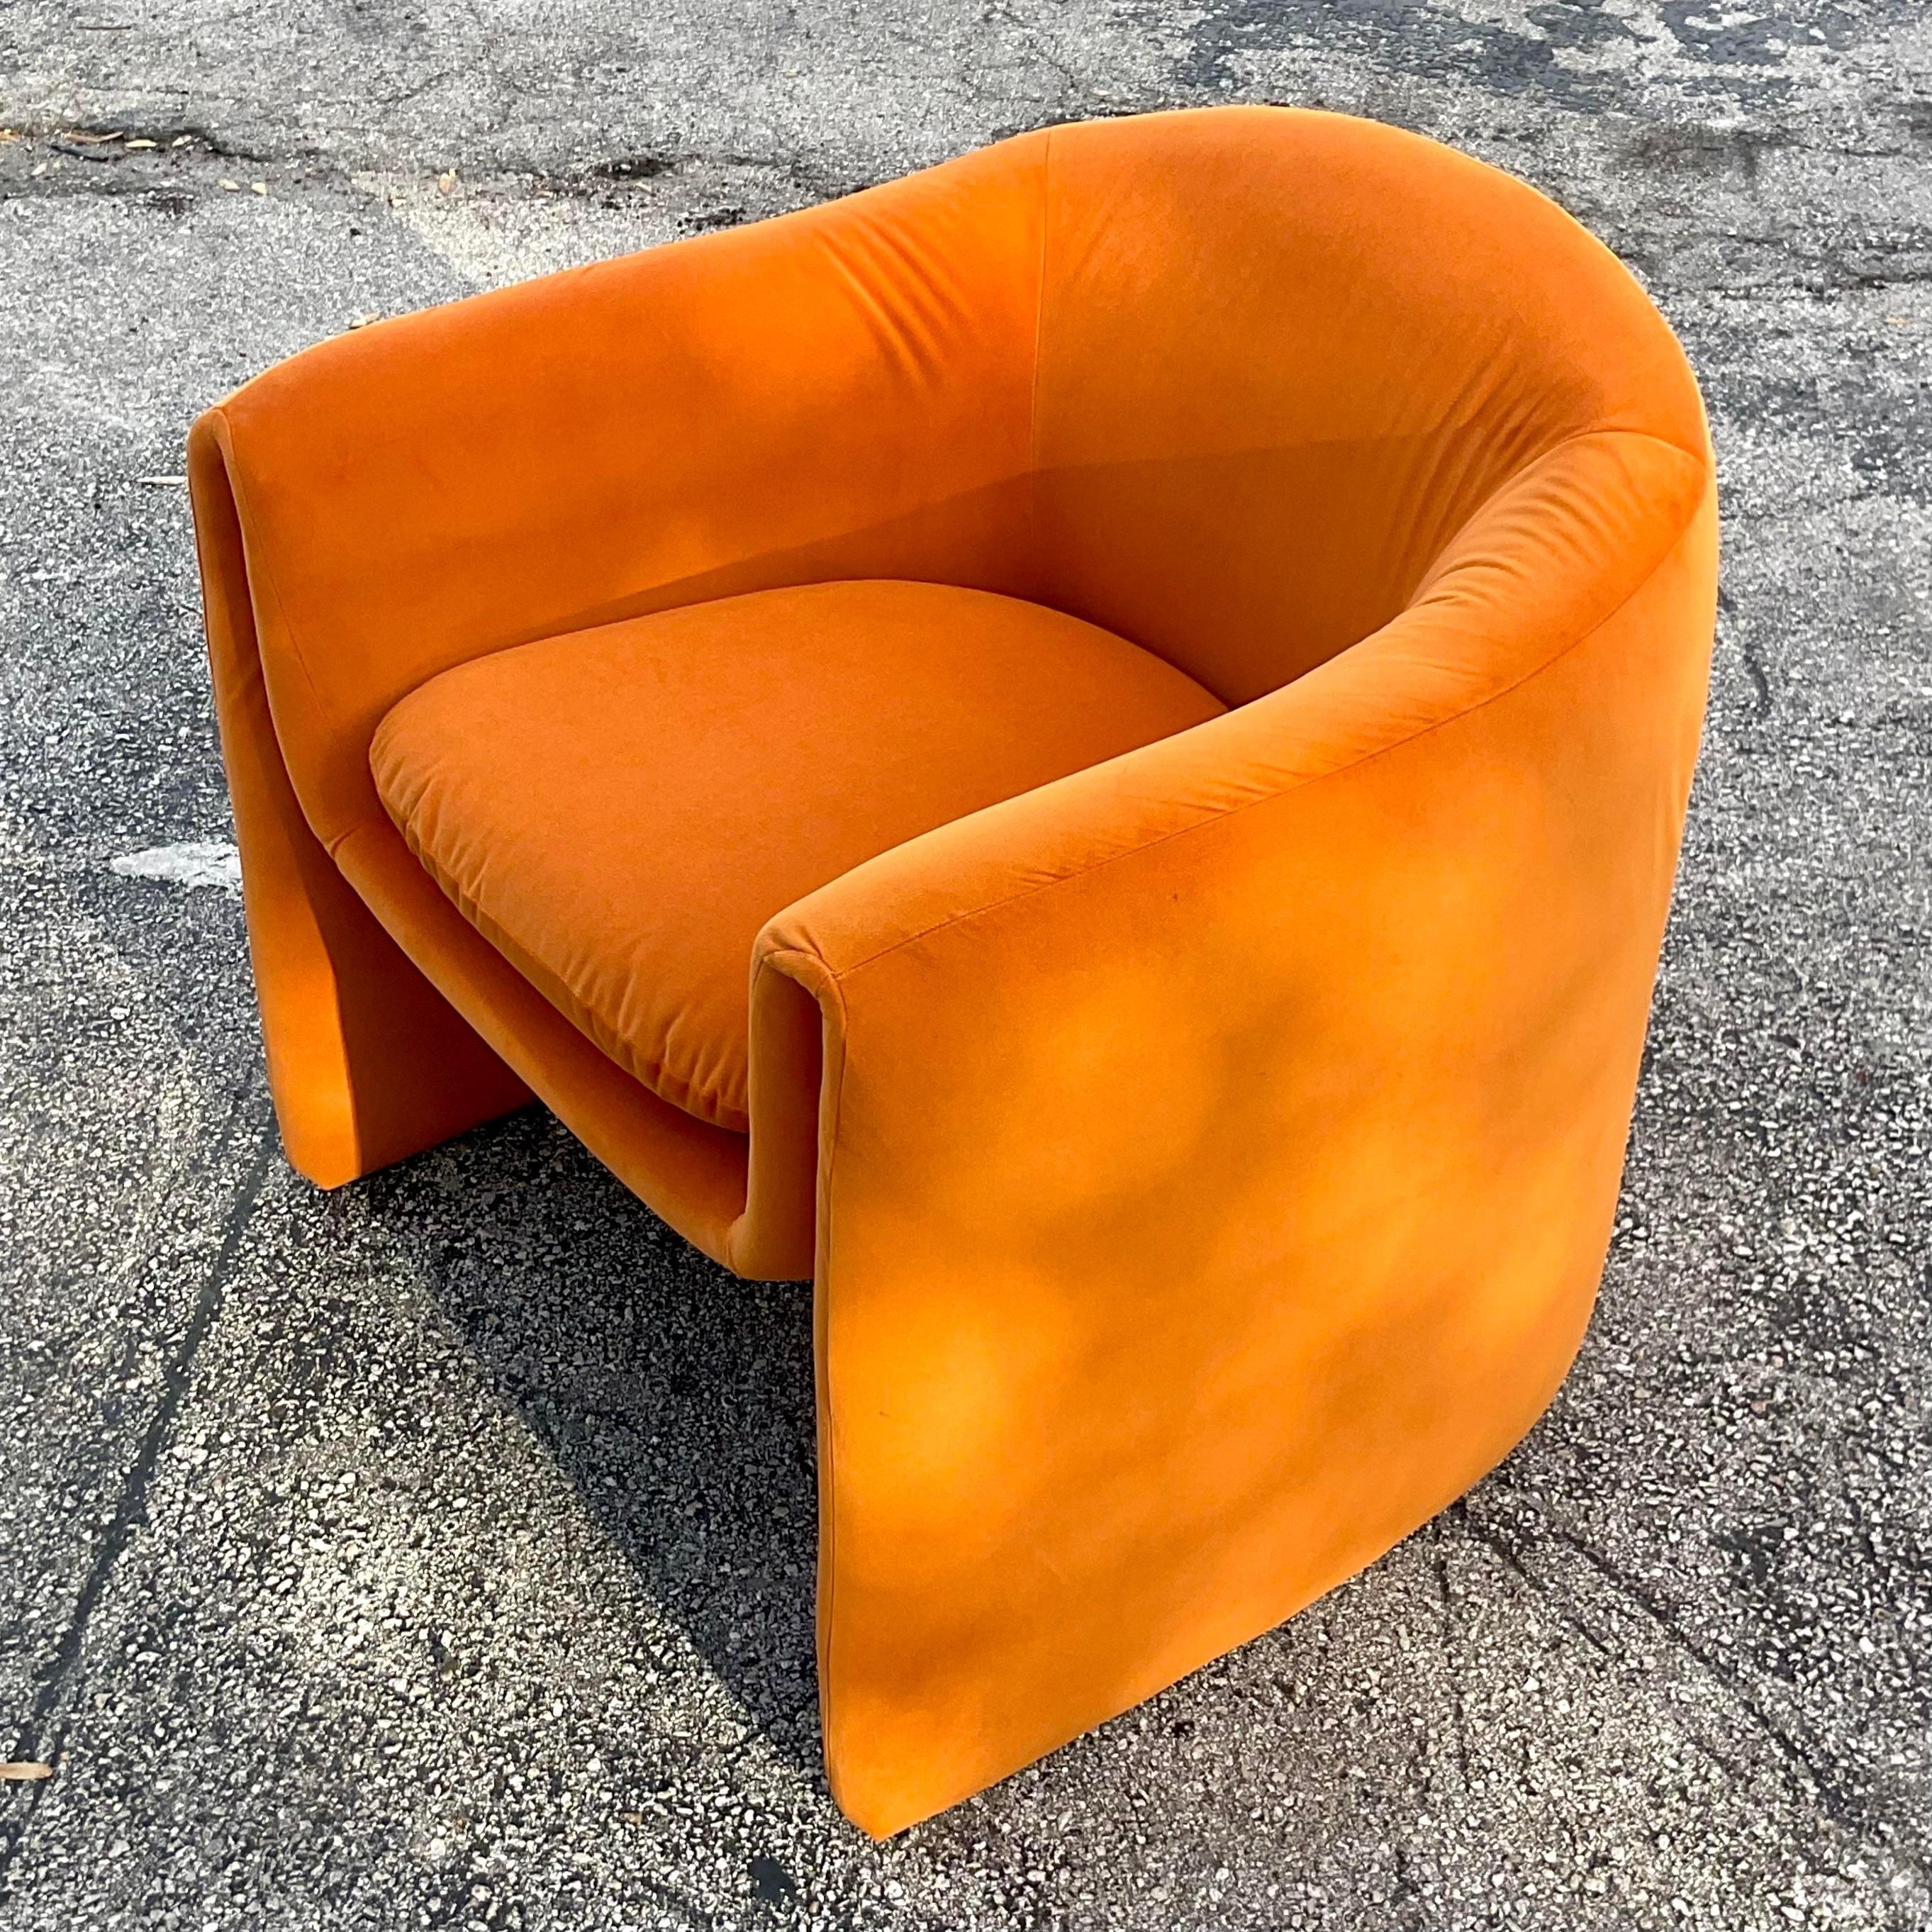 A sensational vintage Boho lounge chair. Made by the iconic Preview group and tagged on the bottom. Fully restored in a chic Orange velvet. Acquired from a Palm Beach estate. 